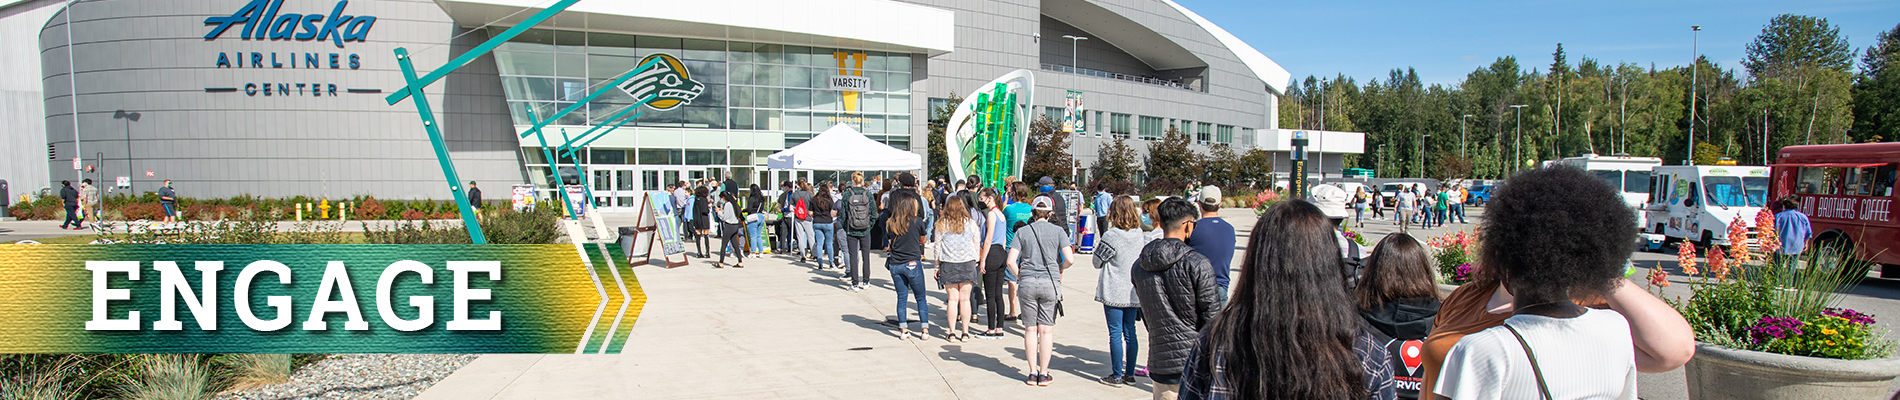 Students in a line to enter Campus Kickoff 2021 in the Alaska Airlines Center with banner that says "Engage"